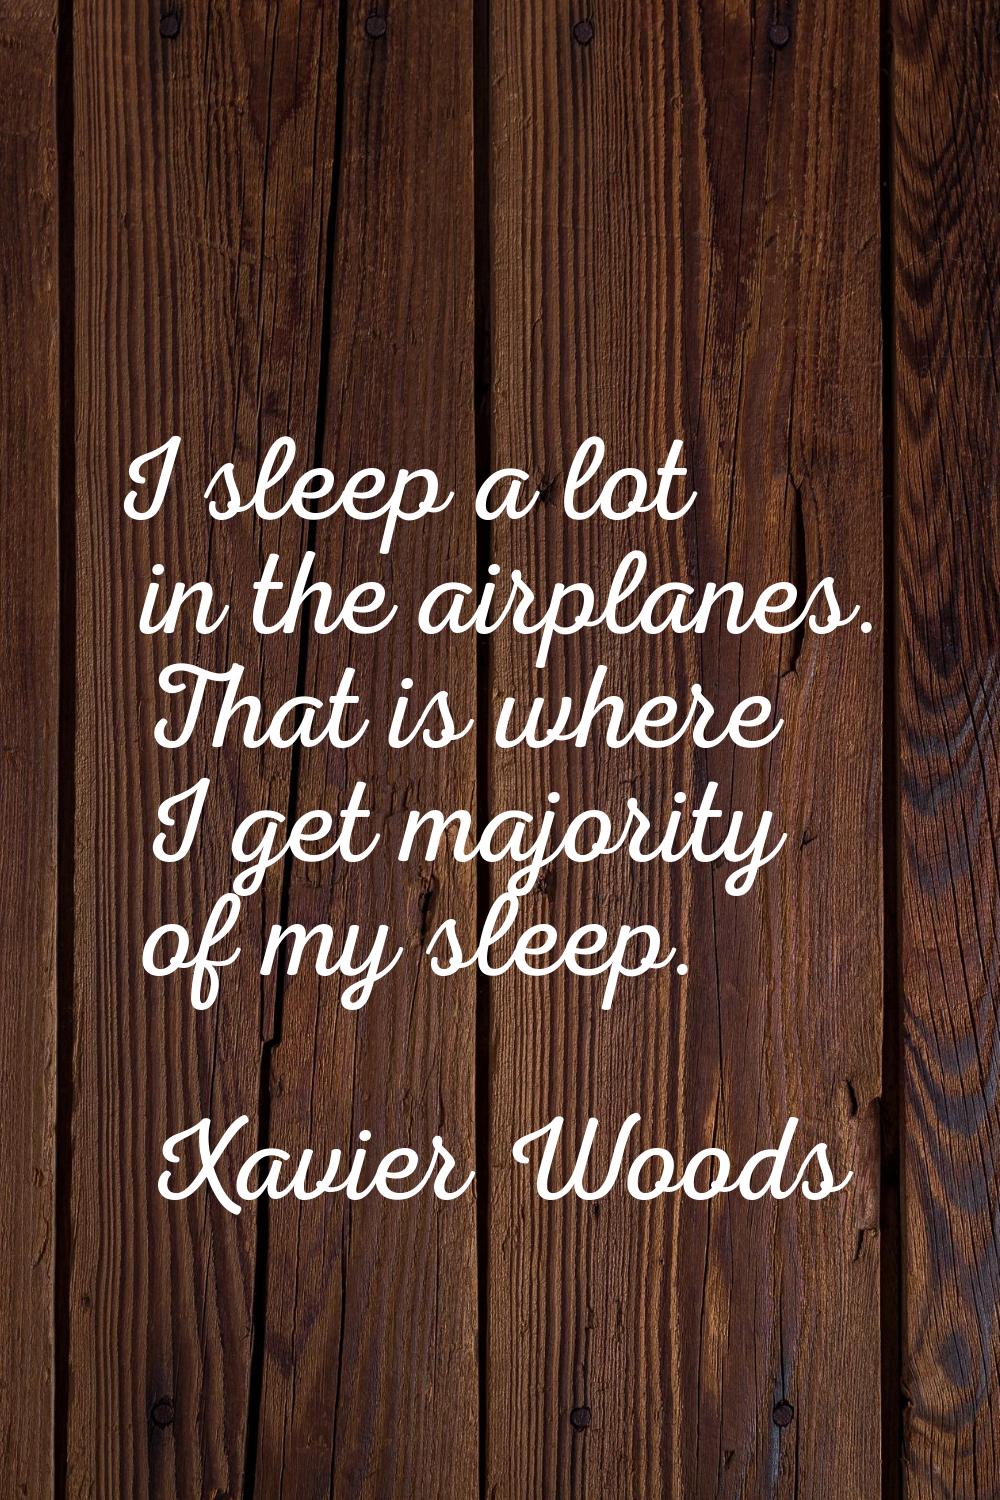 I sleep a lot in the airplanes. That is where I get majority of my sleep.